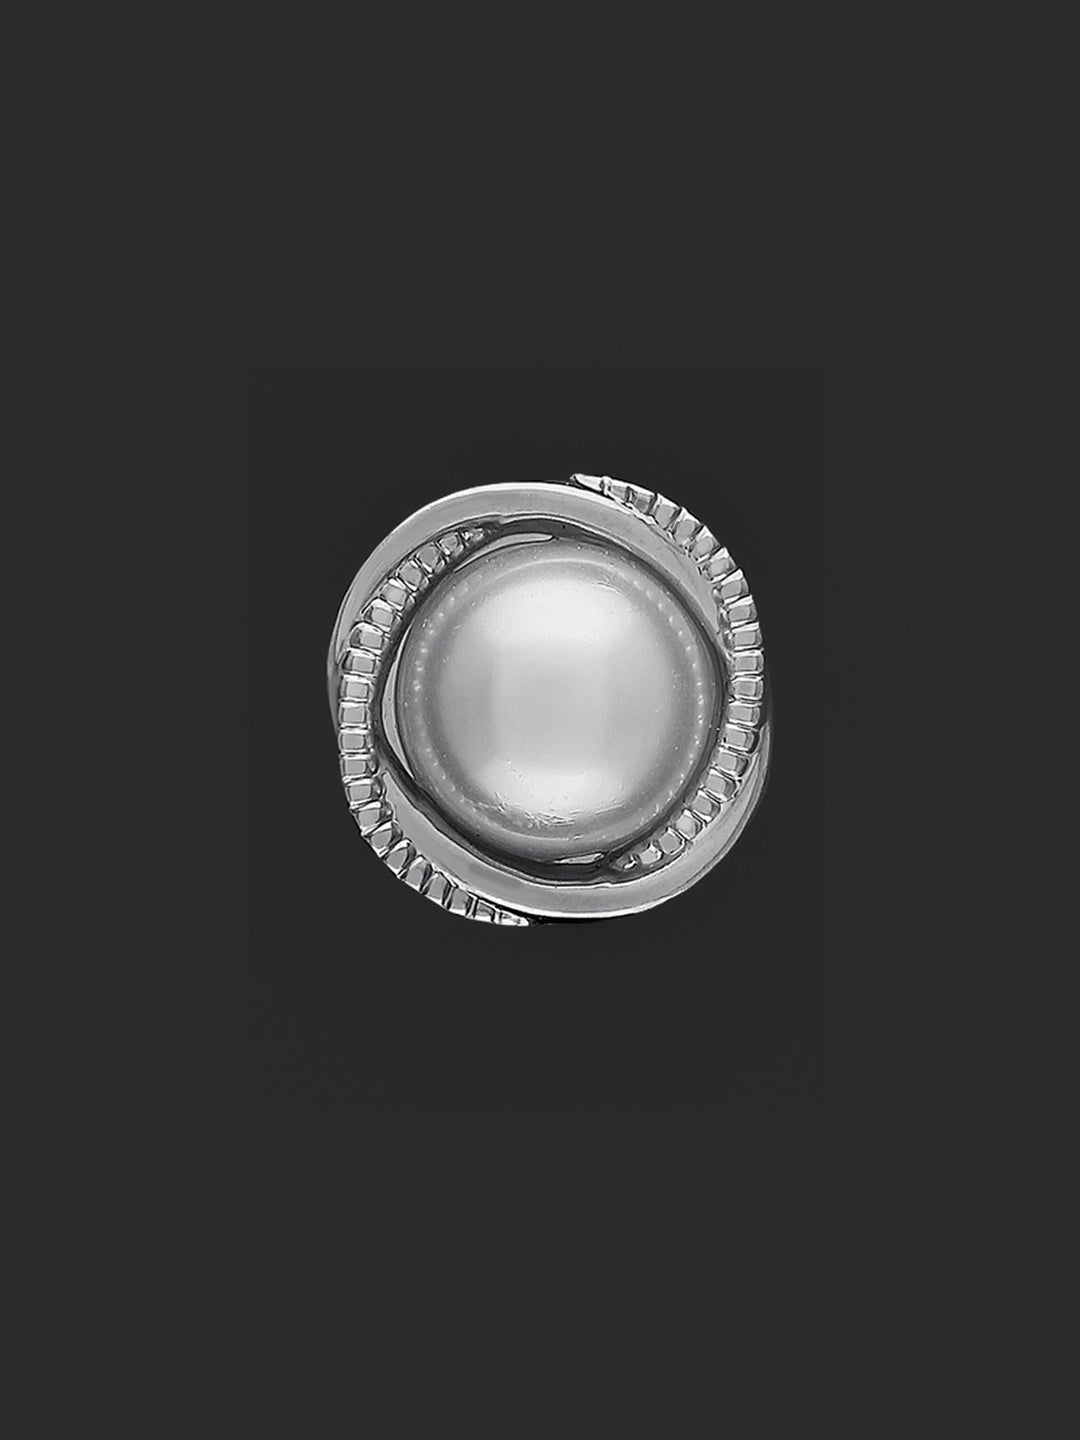 Rounded Square Shape Shiny Pearl Button in Silver Color